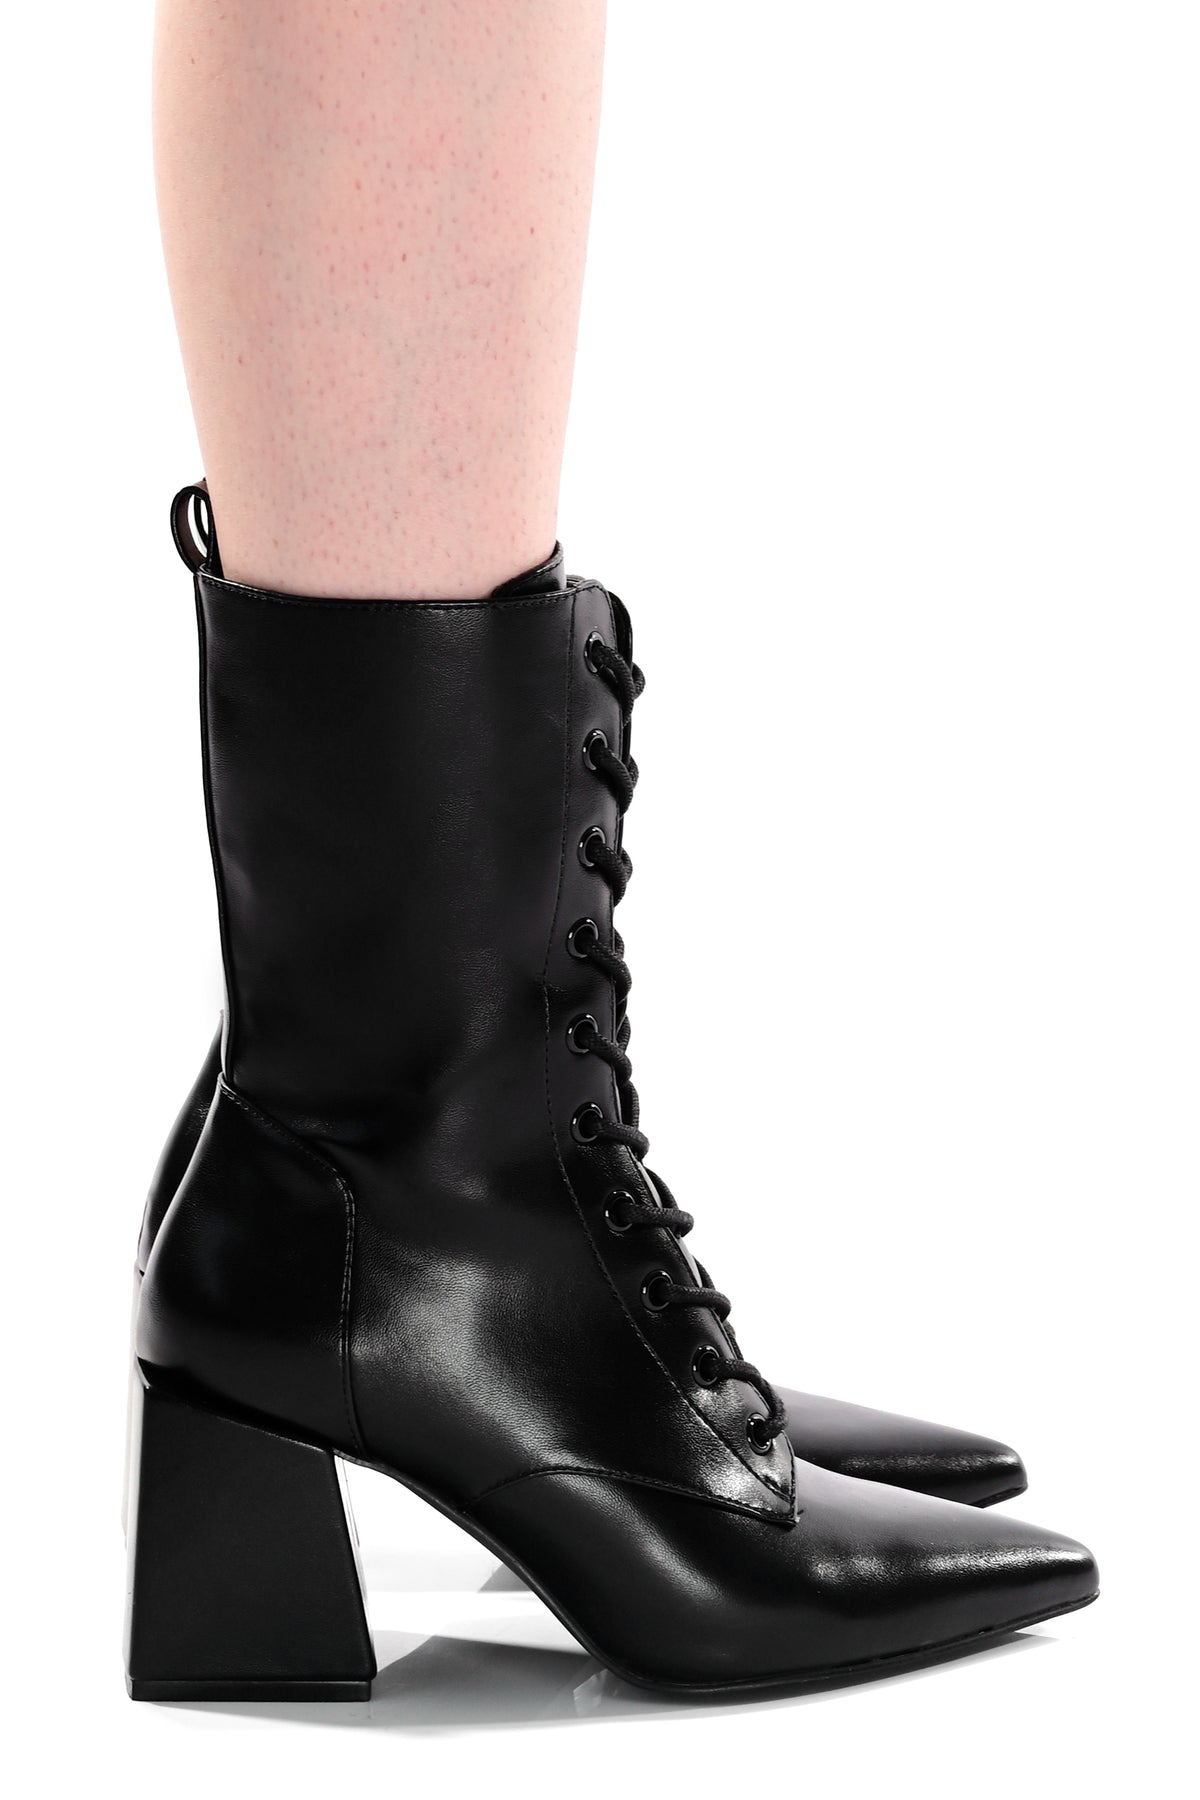 black vegan leather pointed toe boots with lace up front and squared off heel